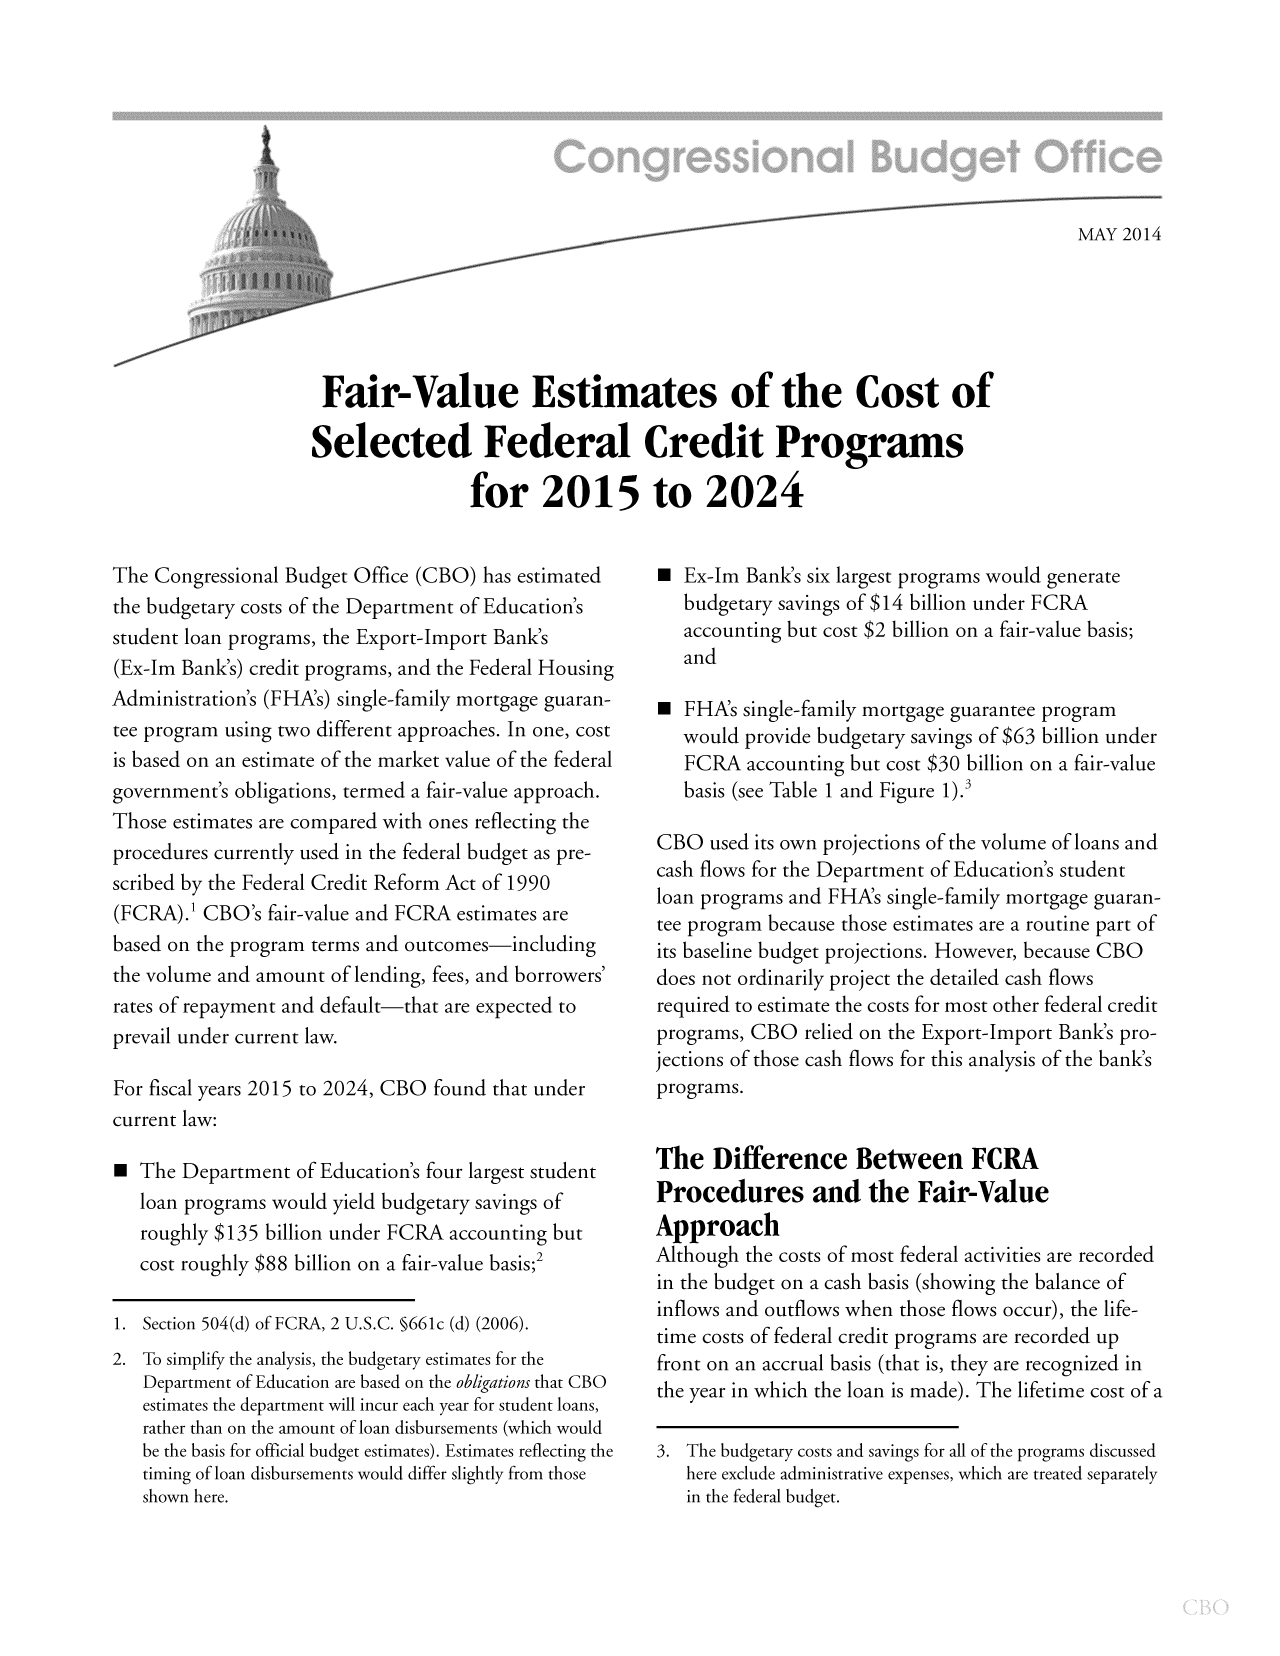 handle is hein.congrec/cbo1629 and id is 1 raw text is: MAY 2014

Fair-Value Estimates of the Cost of
Selected Federal Credit Programs
for 2015 to 2024

The Congressional Budget Office (CBO) has estimated
the budgetary costs of the Department of Education's
student loan programs, the Export-Import Bank's
(Ex-Im Bank's) credit programs, and the Federal Housing
Administration's (FHA's) single-family mortgage guaran-
tee program using two different approaches. In one, cost
is based on an estimate of the market value of the federal
government's obligations, termed a fair-value approach.
Those estimates are compared with ones reflecting the
procedures currently used in the federal budget as pre-
scribed by the Federal Credit Reform Act of 1990
(FCRA).' CBO's fair-value and FCRA estimates are
based on the program terms and outcomes-including
the volume and amount of lending, fees, and borrowers'
rates of repayment and default-that are expected to
prevail under current law.
For fiscal years 2015 to 2024, CBO found that under
current law:
0 The Department of Education's four largest student
loan programs would yield budgetary savings of
roughly $135 billion under FCRA accounting but
cost roughly $88 billion on a fair-value basis;2
1. Section 504(d) of FCRA, 2 U.S.C. §661c (d) (2006).
2. To simplify the analysis, the budgetary estimates for the
Department of Education are based on the obligations that CBO
estimates the department will incur each year for student loans,
rather than on the amount of loan disbursements (which would
be the basis for official budget estimates). Estimates reflecting the
timing of loan disbursements would differ slightly from those
shown here.

 Ex-Im Bank's six largest programs would generate
budgetary savings of $14 billion under FCRA
accounting but cost $2 billion on a fair-value basis;
and
 FHA's single-family mortgage guarantee program
would provide budgetary savings of $63 billion under
FCRA accounting but cost $30 billion on a fair-value
basis (see Table 1 and Figure 1).3
CBO used its own projections of the volume of loans and
cash flows for the Department of Education's student
loan programs and FHA's single-family mortgage guaran-
tee program because those estimates are a routine part of
its baseline budget projections. However, because CBO
does not ordinarily project the detailed cash flows
required to estimate the costs for most other federal credit
programs, CBO relied on the Export-Import Bank's pro-
jections of those cash flows for this analysis of the bank's
programs.
The Difference Between FCRA
Procedures and the Fair-Value
Approach
Although the costs of most federal activities are recorded
in the budget on a cash basis (showing the balance of
inflows and outflows when those flows occur), the life-
time costs of federal credit programs are recorded up
front on an accrual basis (that is, they are recognized in
the year in which the loan is made). The lifetime cost of a
3. The budgetary costs and savings for all of the programs discussed
here exclude administrative expenses, which are treated separately
in the federal budget.


